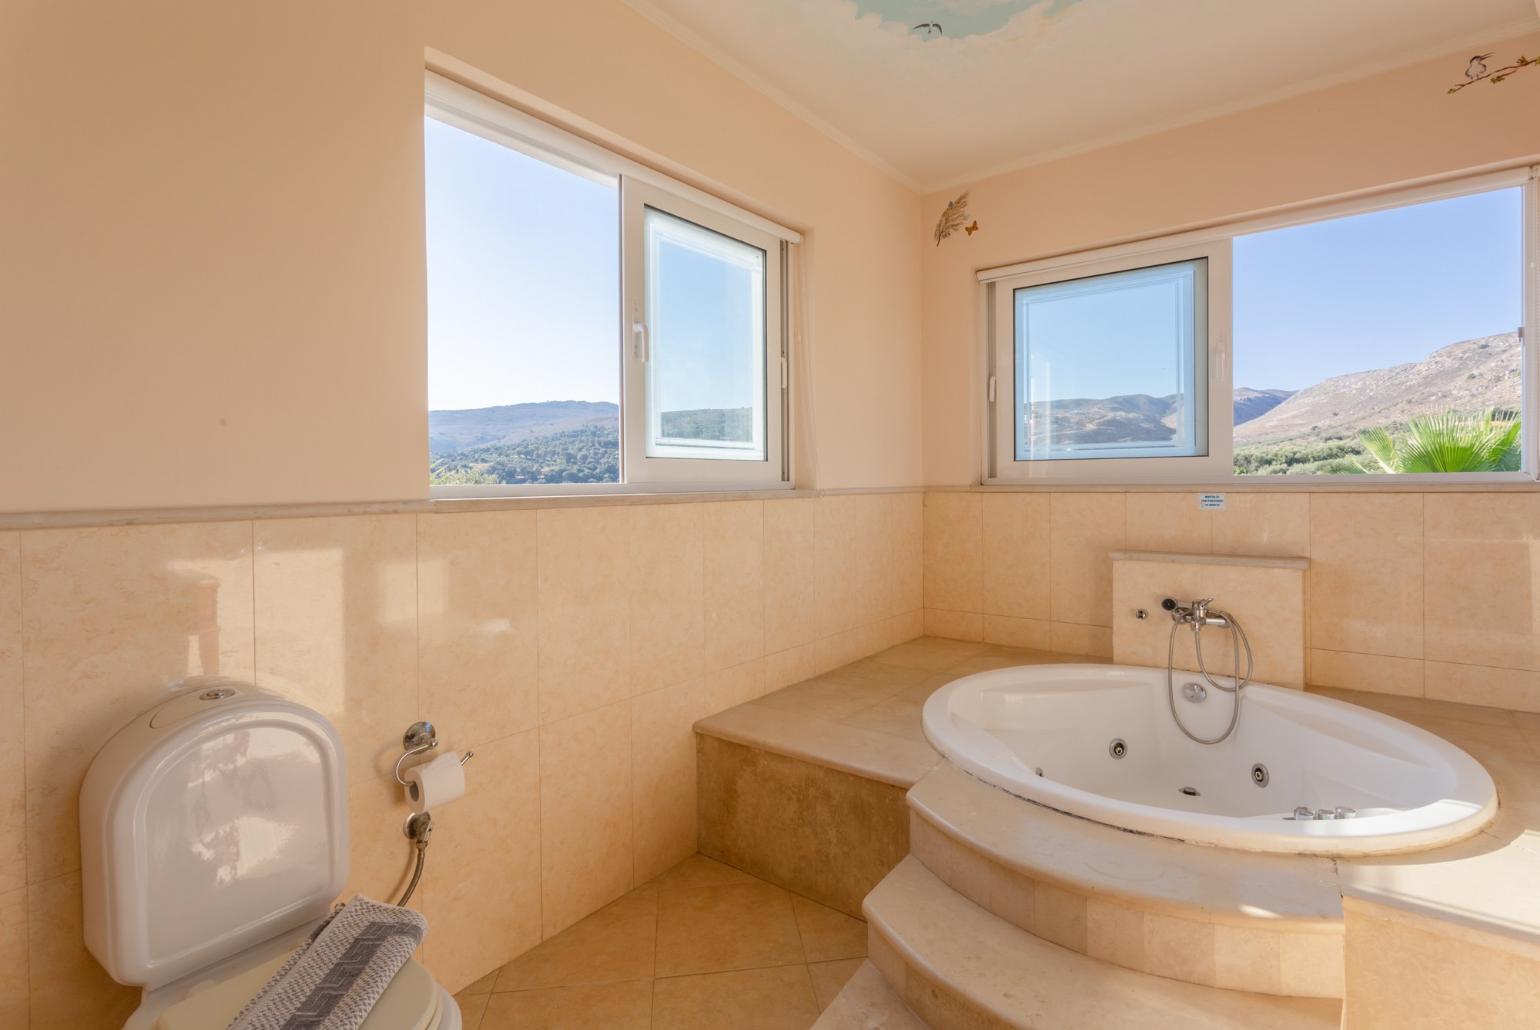 En suite bathroom with jacuzzi and shower